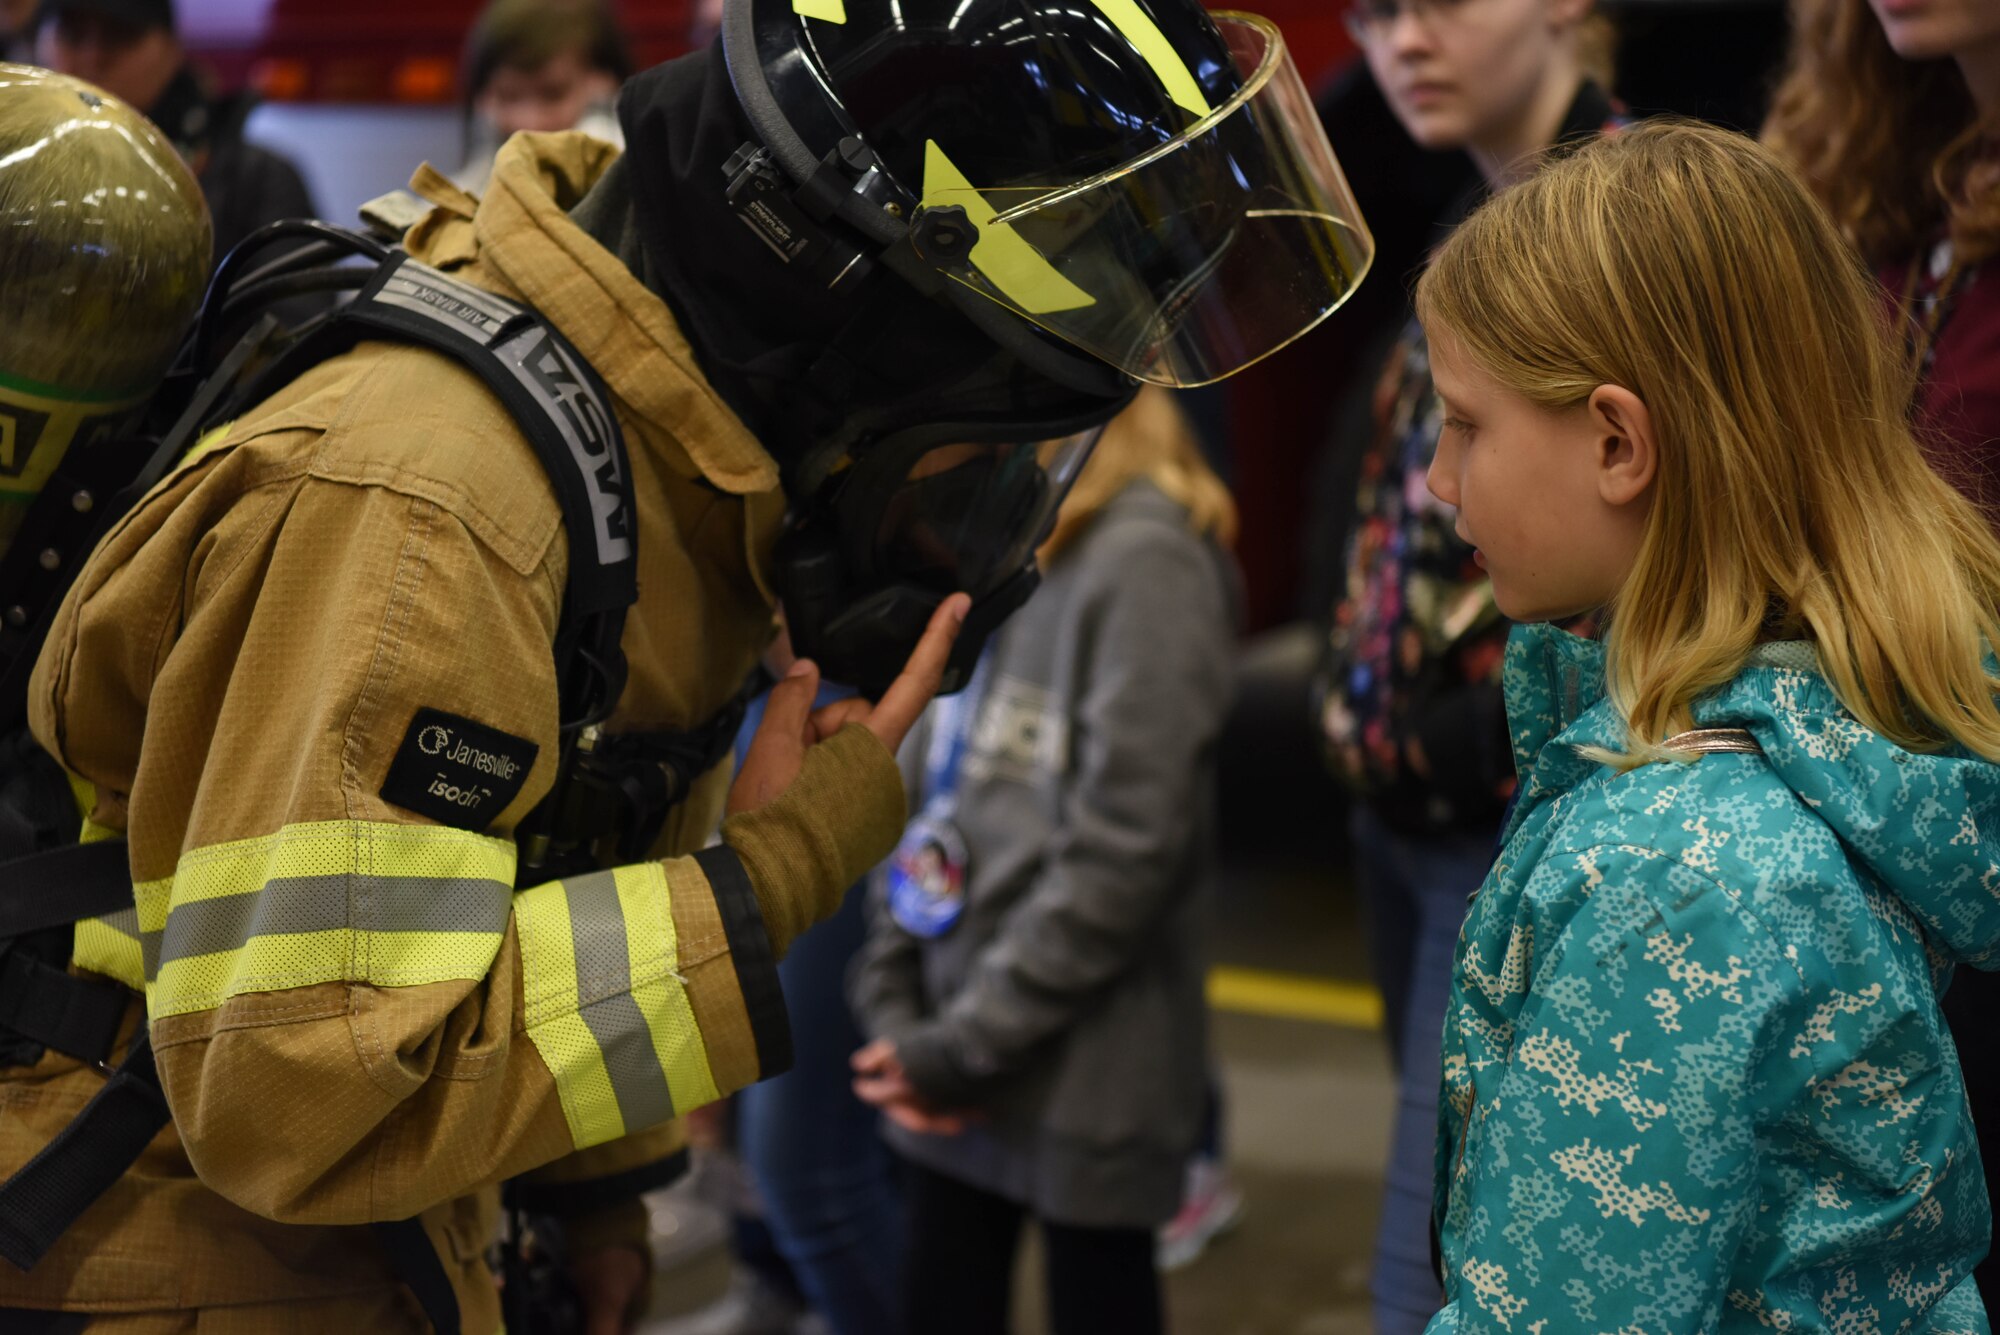 Airman 1st Class Kayla Jerido, 86th Civil Engineer Squadron firefighter shows Lucena Hanna her fire protection gear during Young Women in Aviation Day on Ramstein Air Base, Germany, March, 9, 2019. Jerido showed how fast she could put on her suit and equipment, while also showing the many instruments that protect her during a fire.